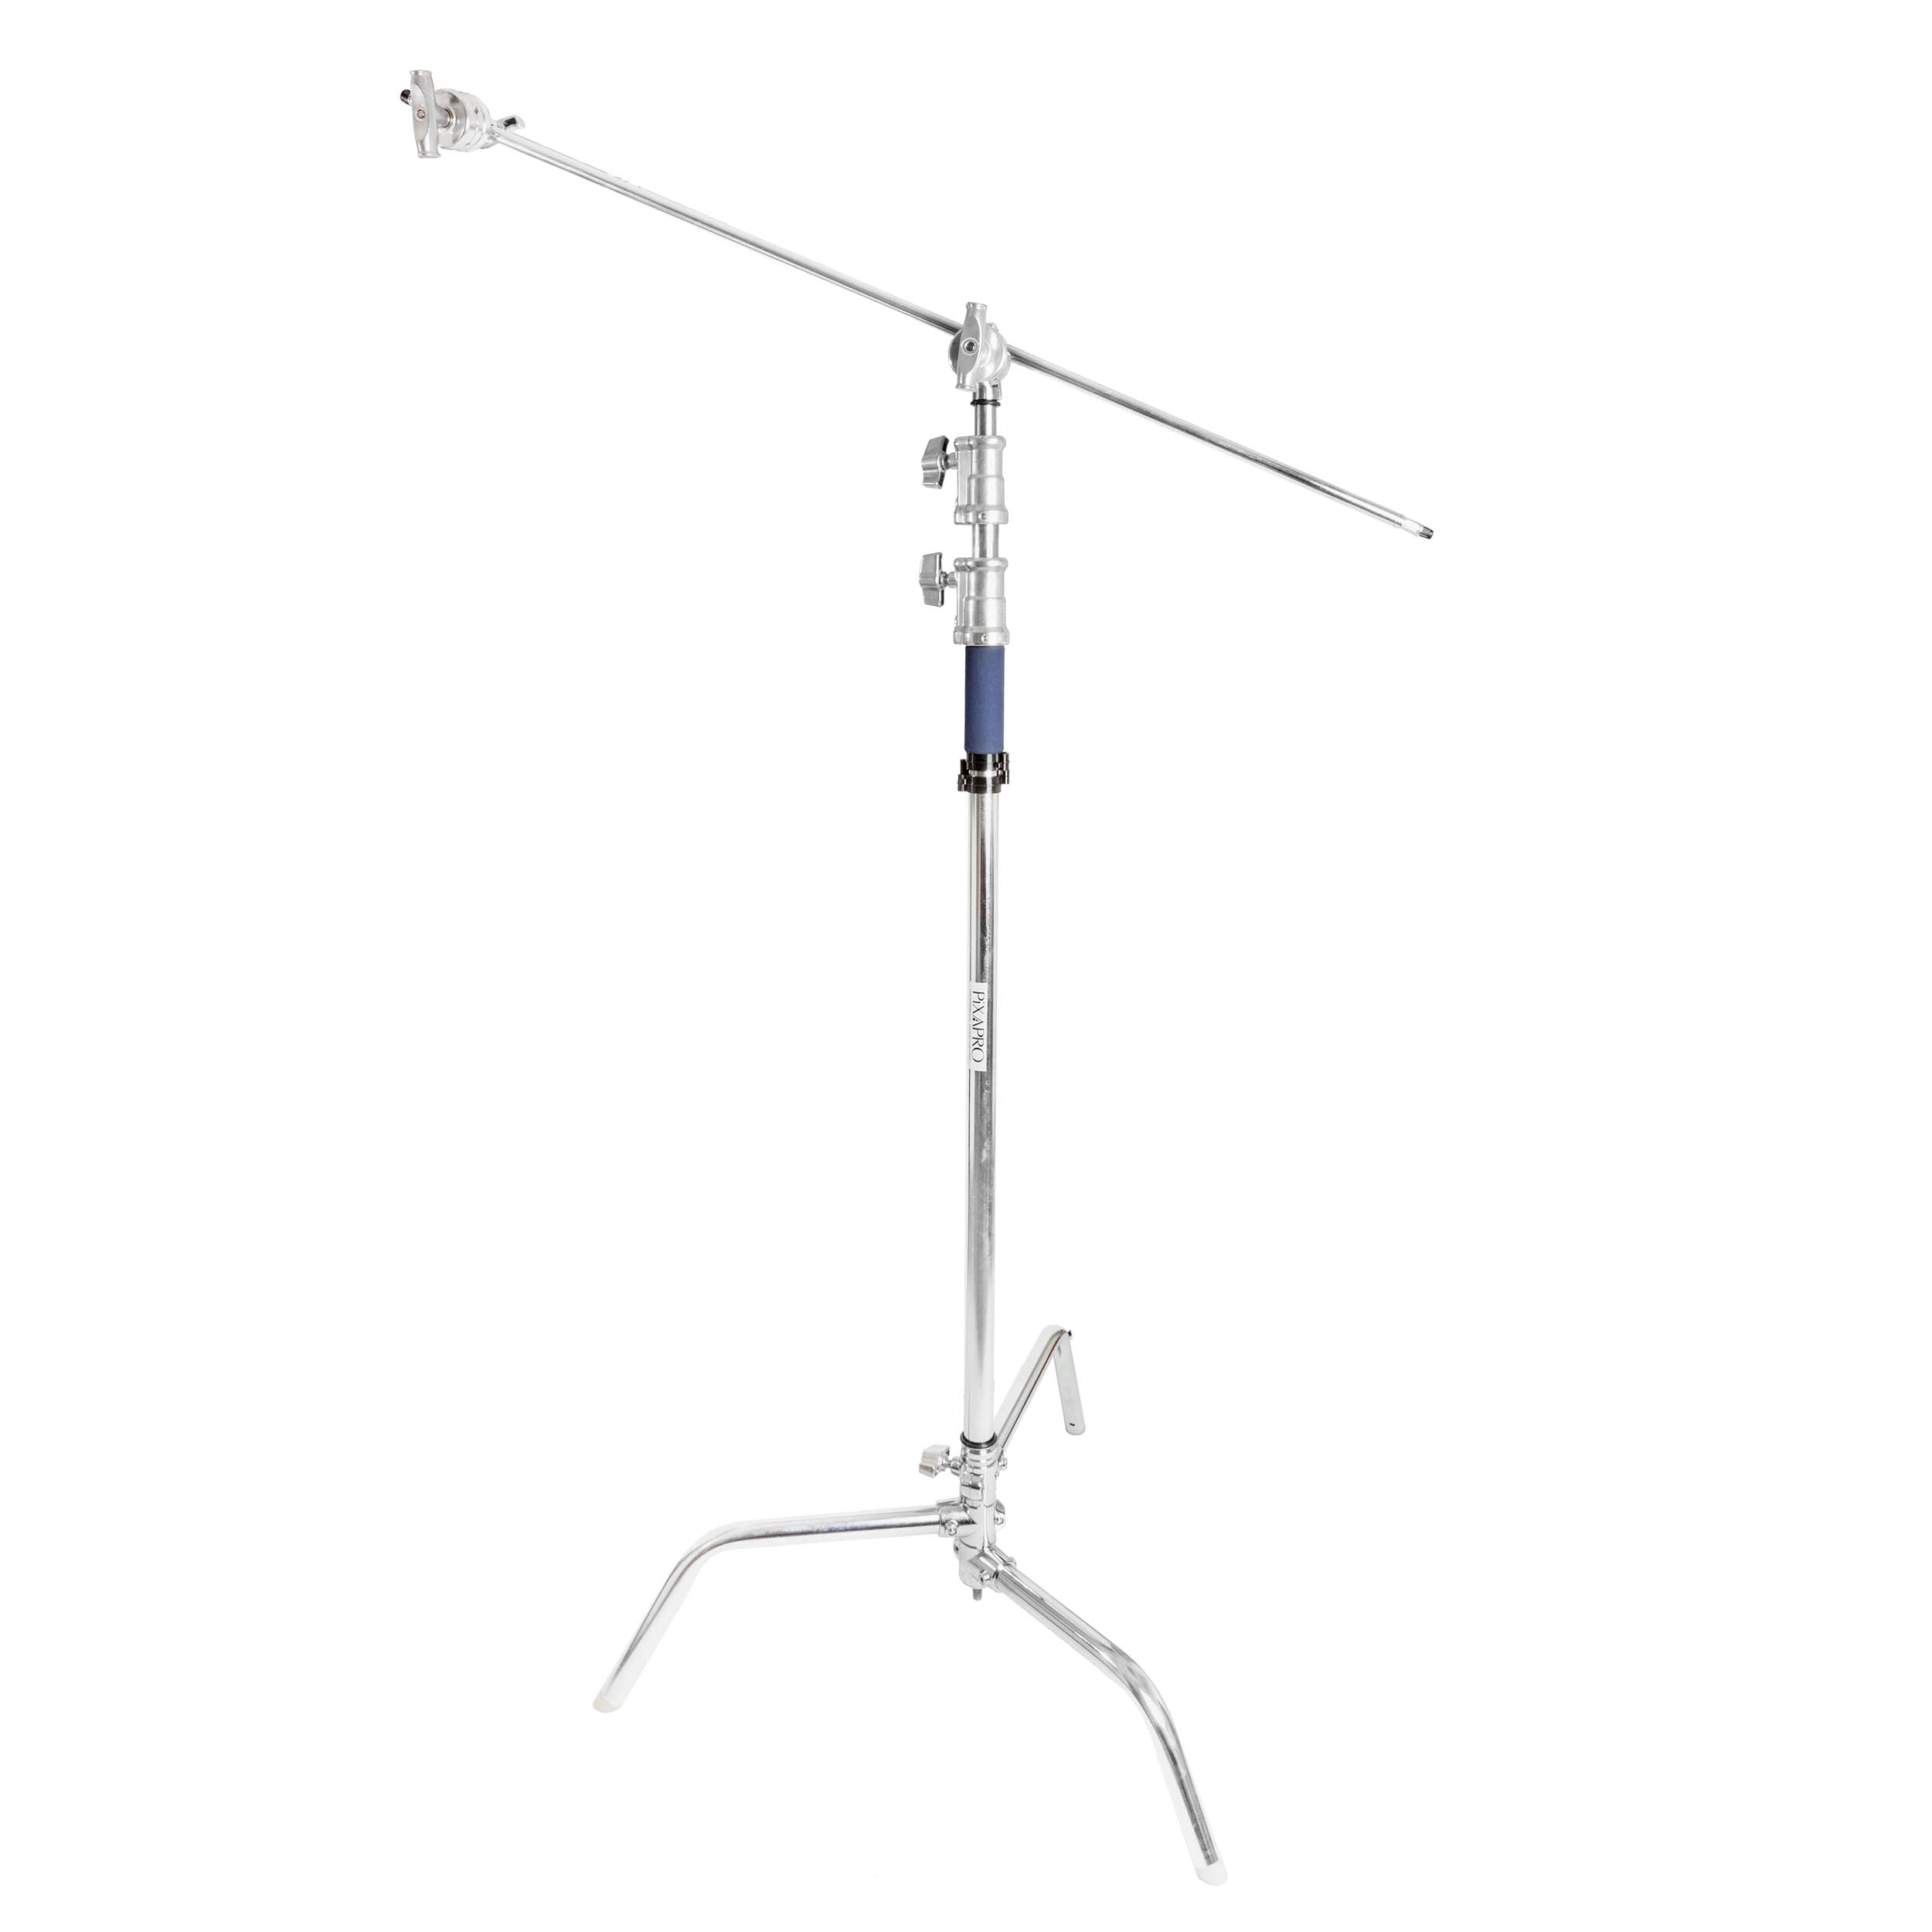 50" Collapsible and Portable C-Stand with Grip & Arm Set - PixaPro 